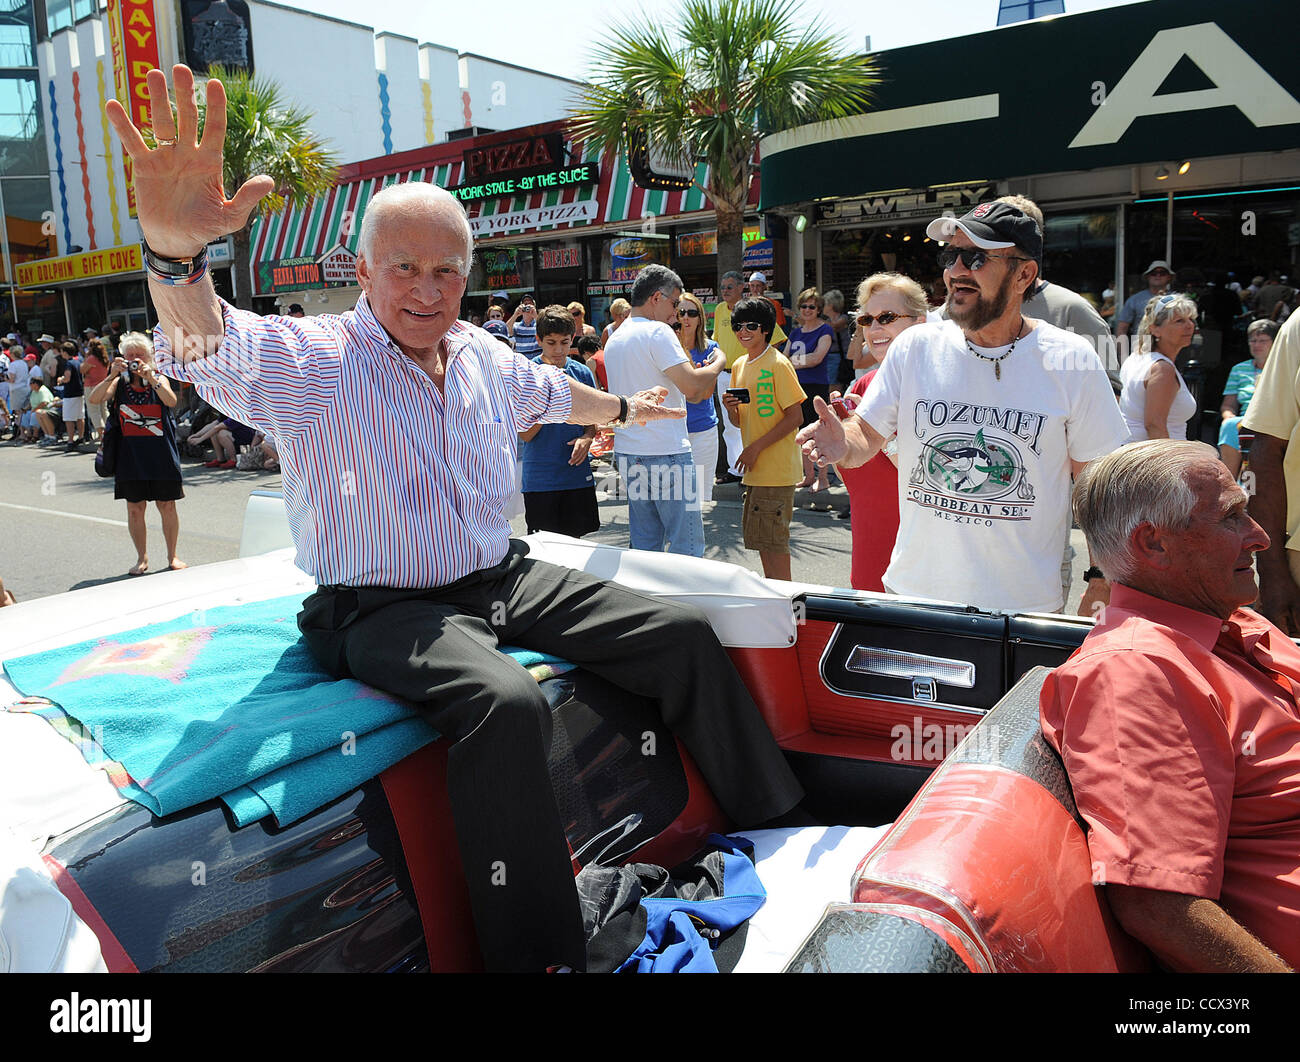 May 29, 2010 - Myrtle Beach, South Carolina; USA - Astronaut BUZZ ALDRIN takes part in the 2010 Mayfest as the Grand Marshall of the Myrtle Beach Parade and was also awarded the key to the city.  Colonel Buzz Aldrin spent the morning shaking hands with his fans and participating in the days activiti Stock Photo